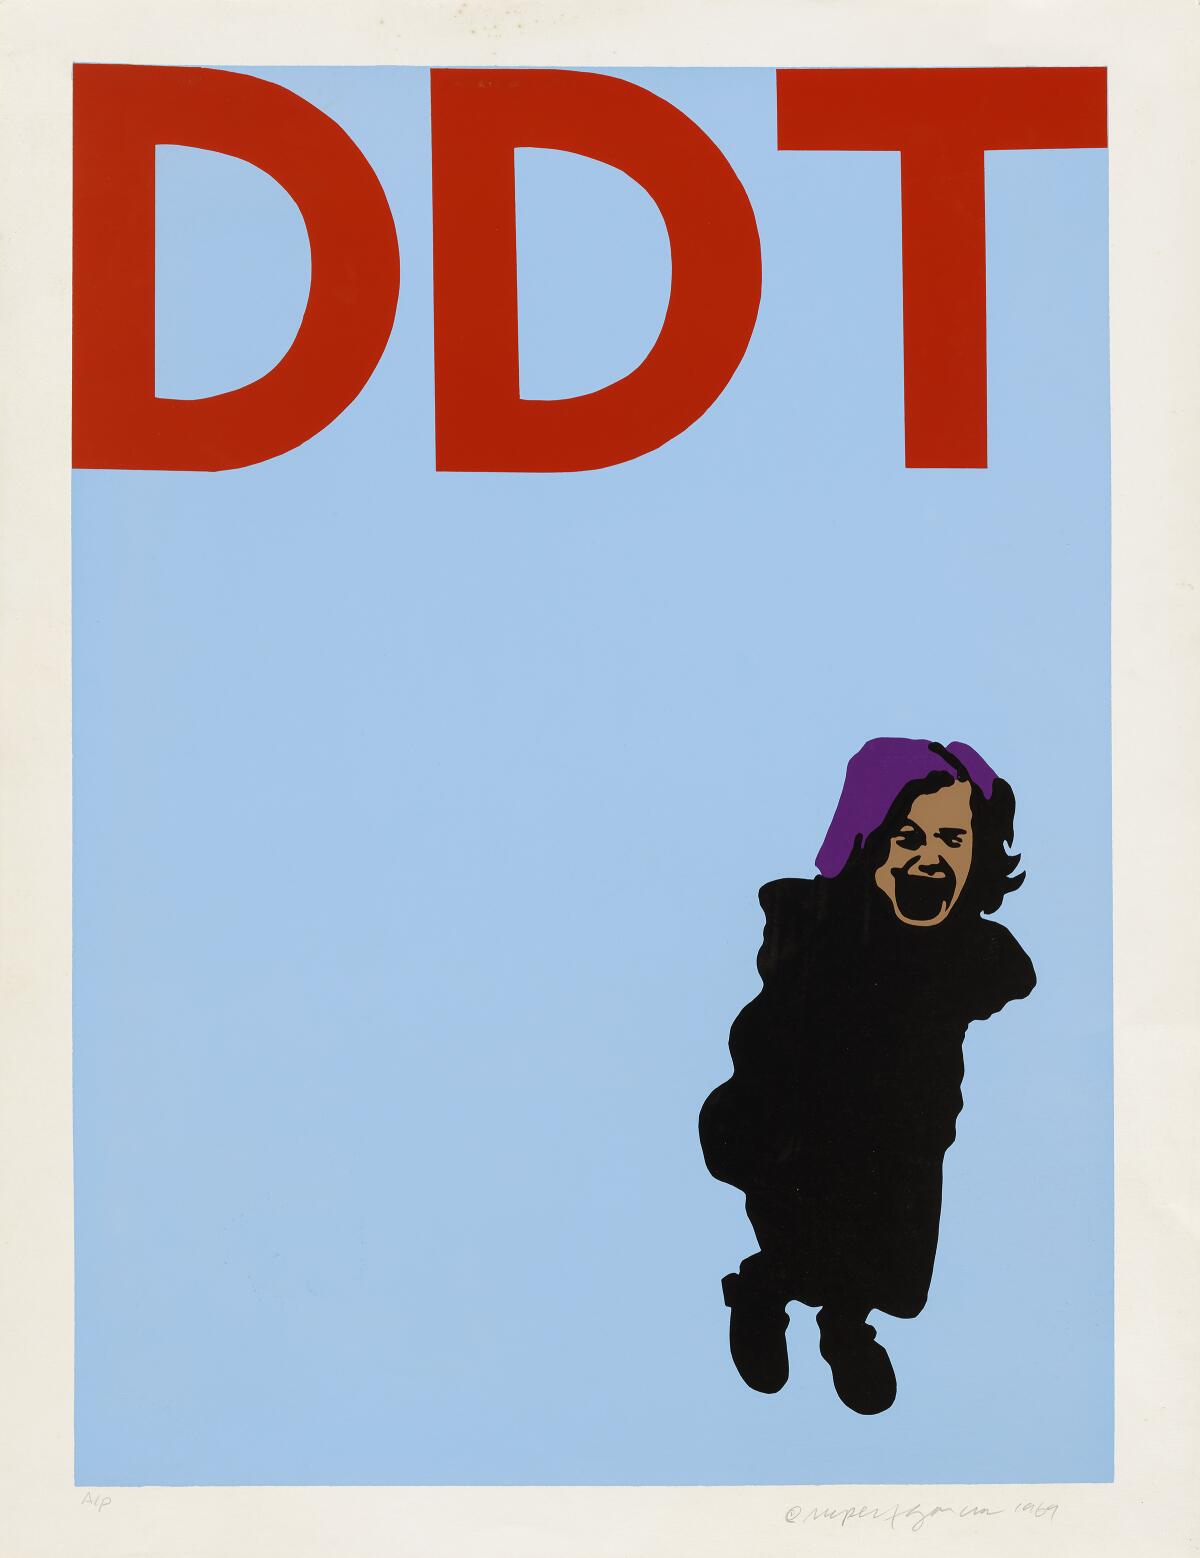 A small figure is seen screaming against a flat blue blackground emblazoned with the letters "DDT" in red